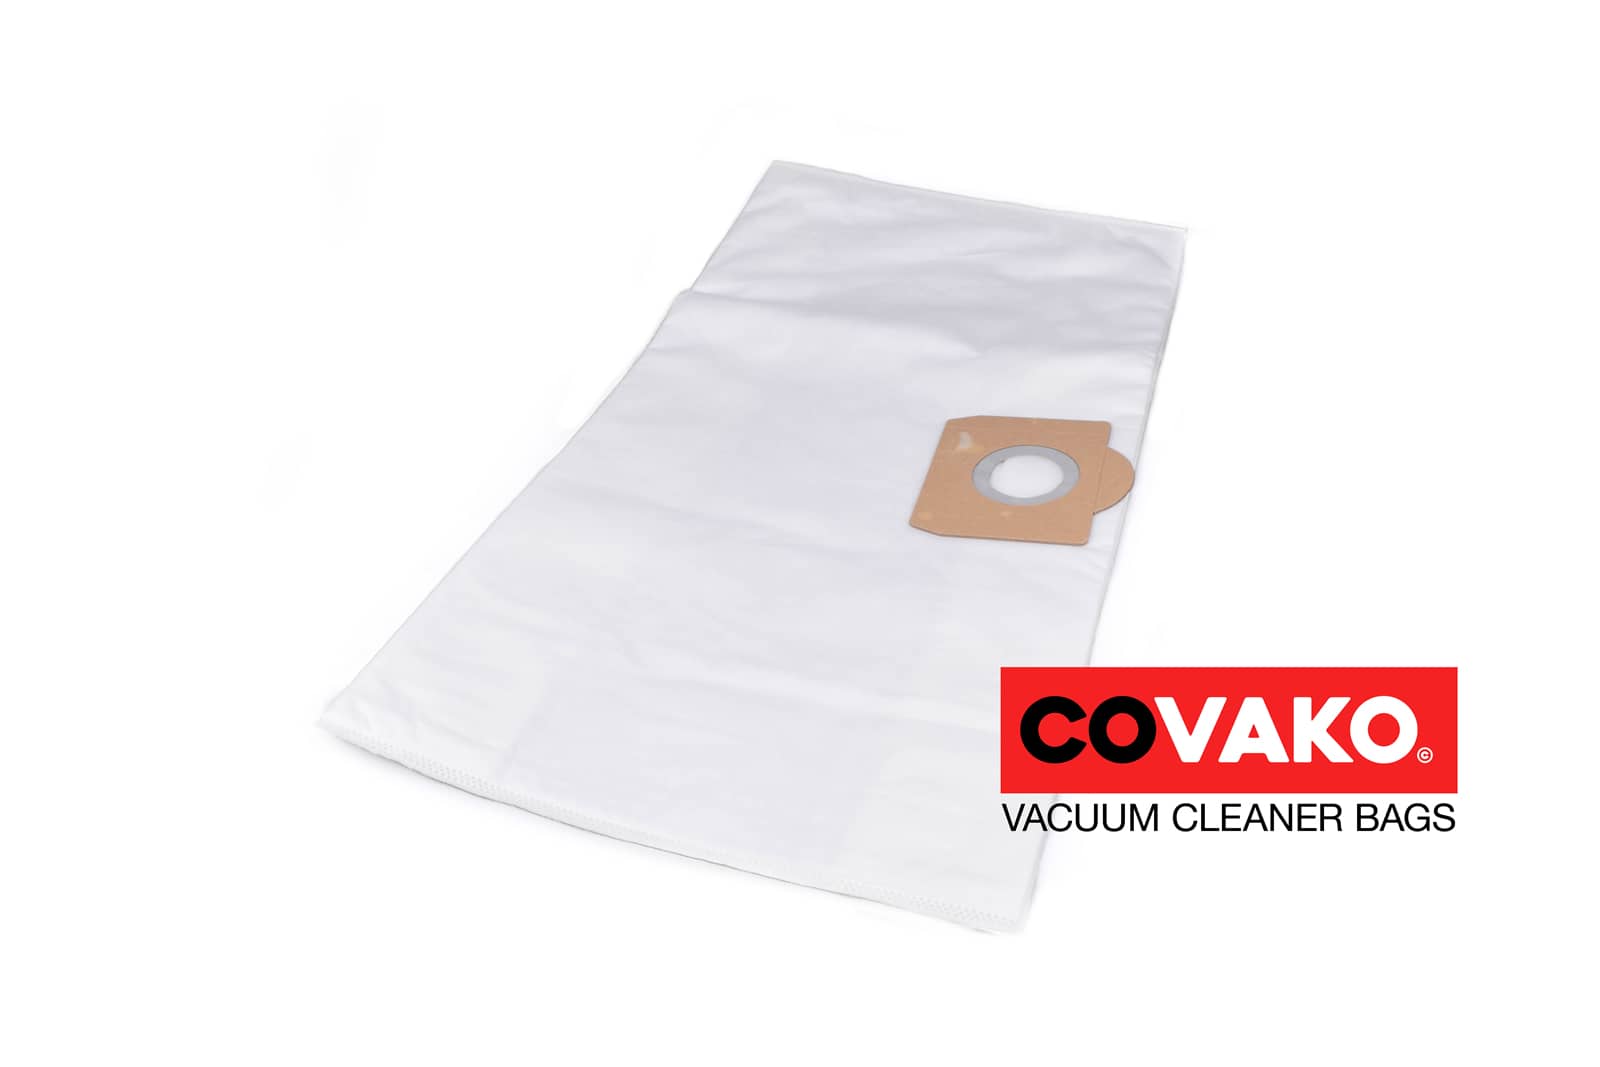 Gansow YS 1500/27 / Synthesis - Gansow vacuum cleaner bags